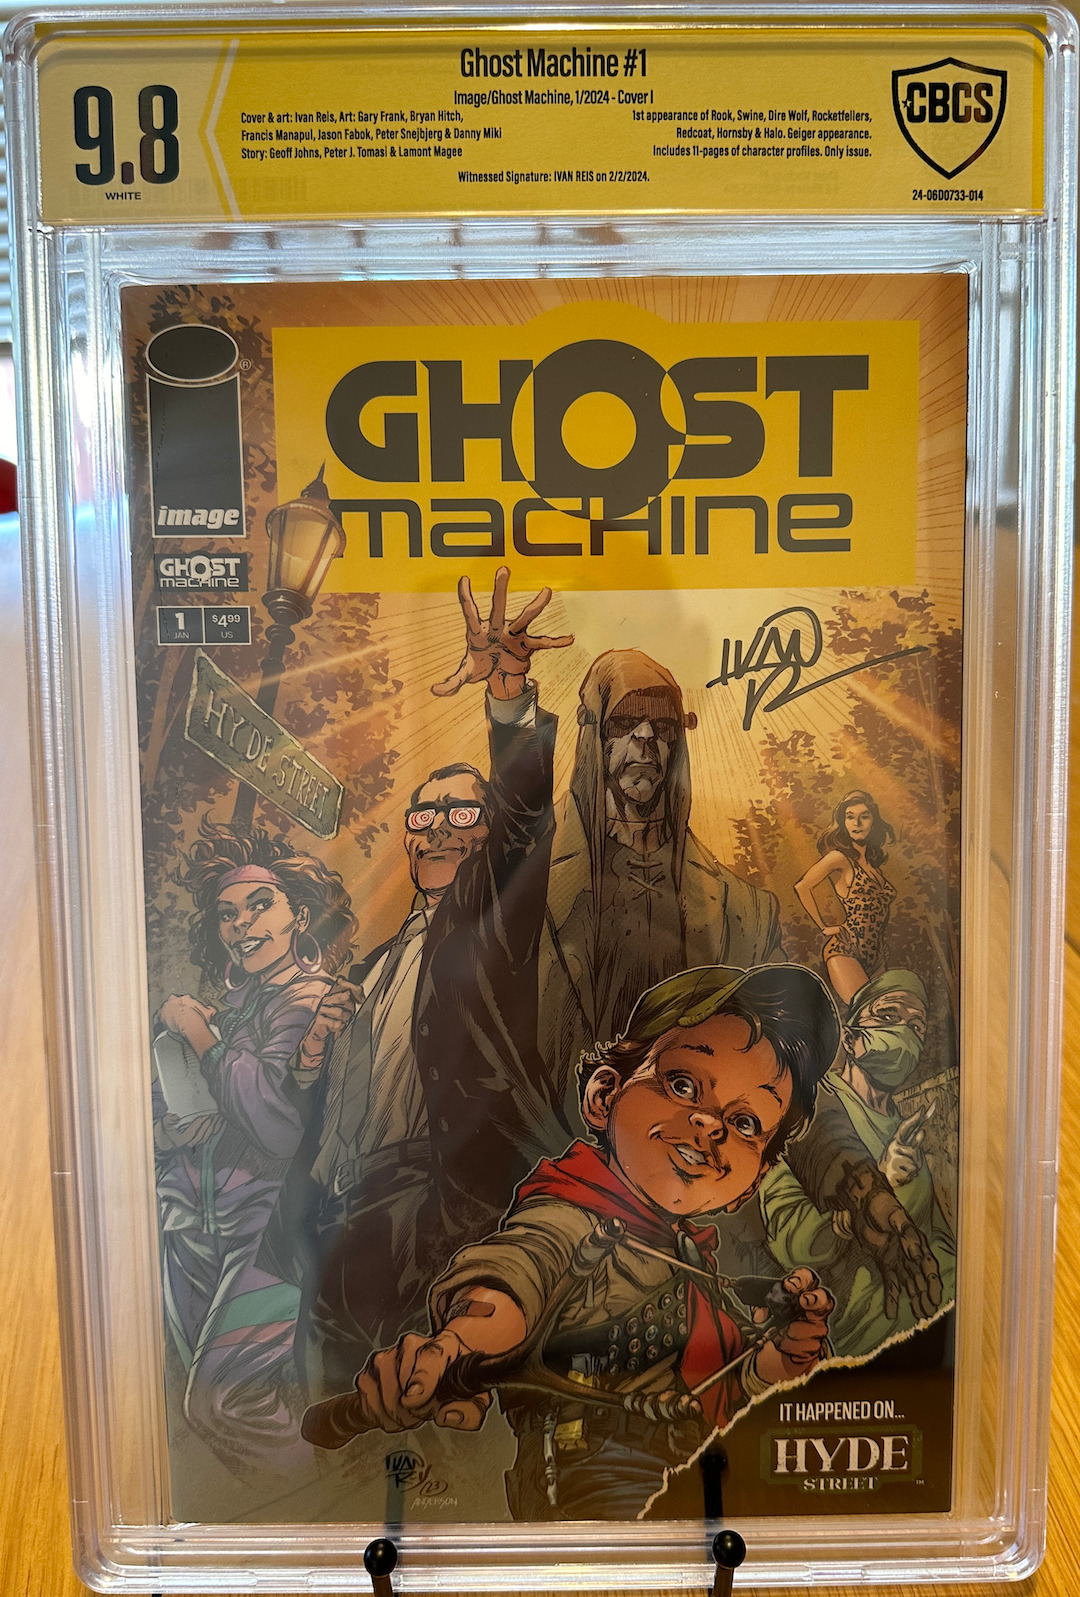 Ghost Machine #1 It Happened on Hyde Street by Ivan Reis Signed CBCS 9.8 FP